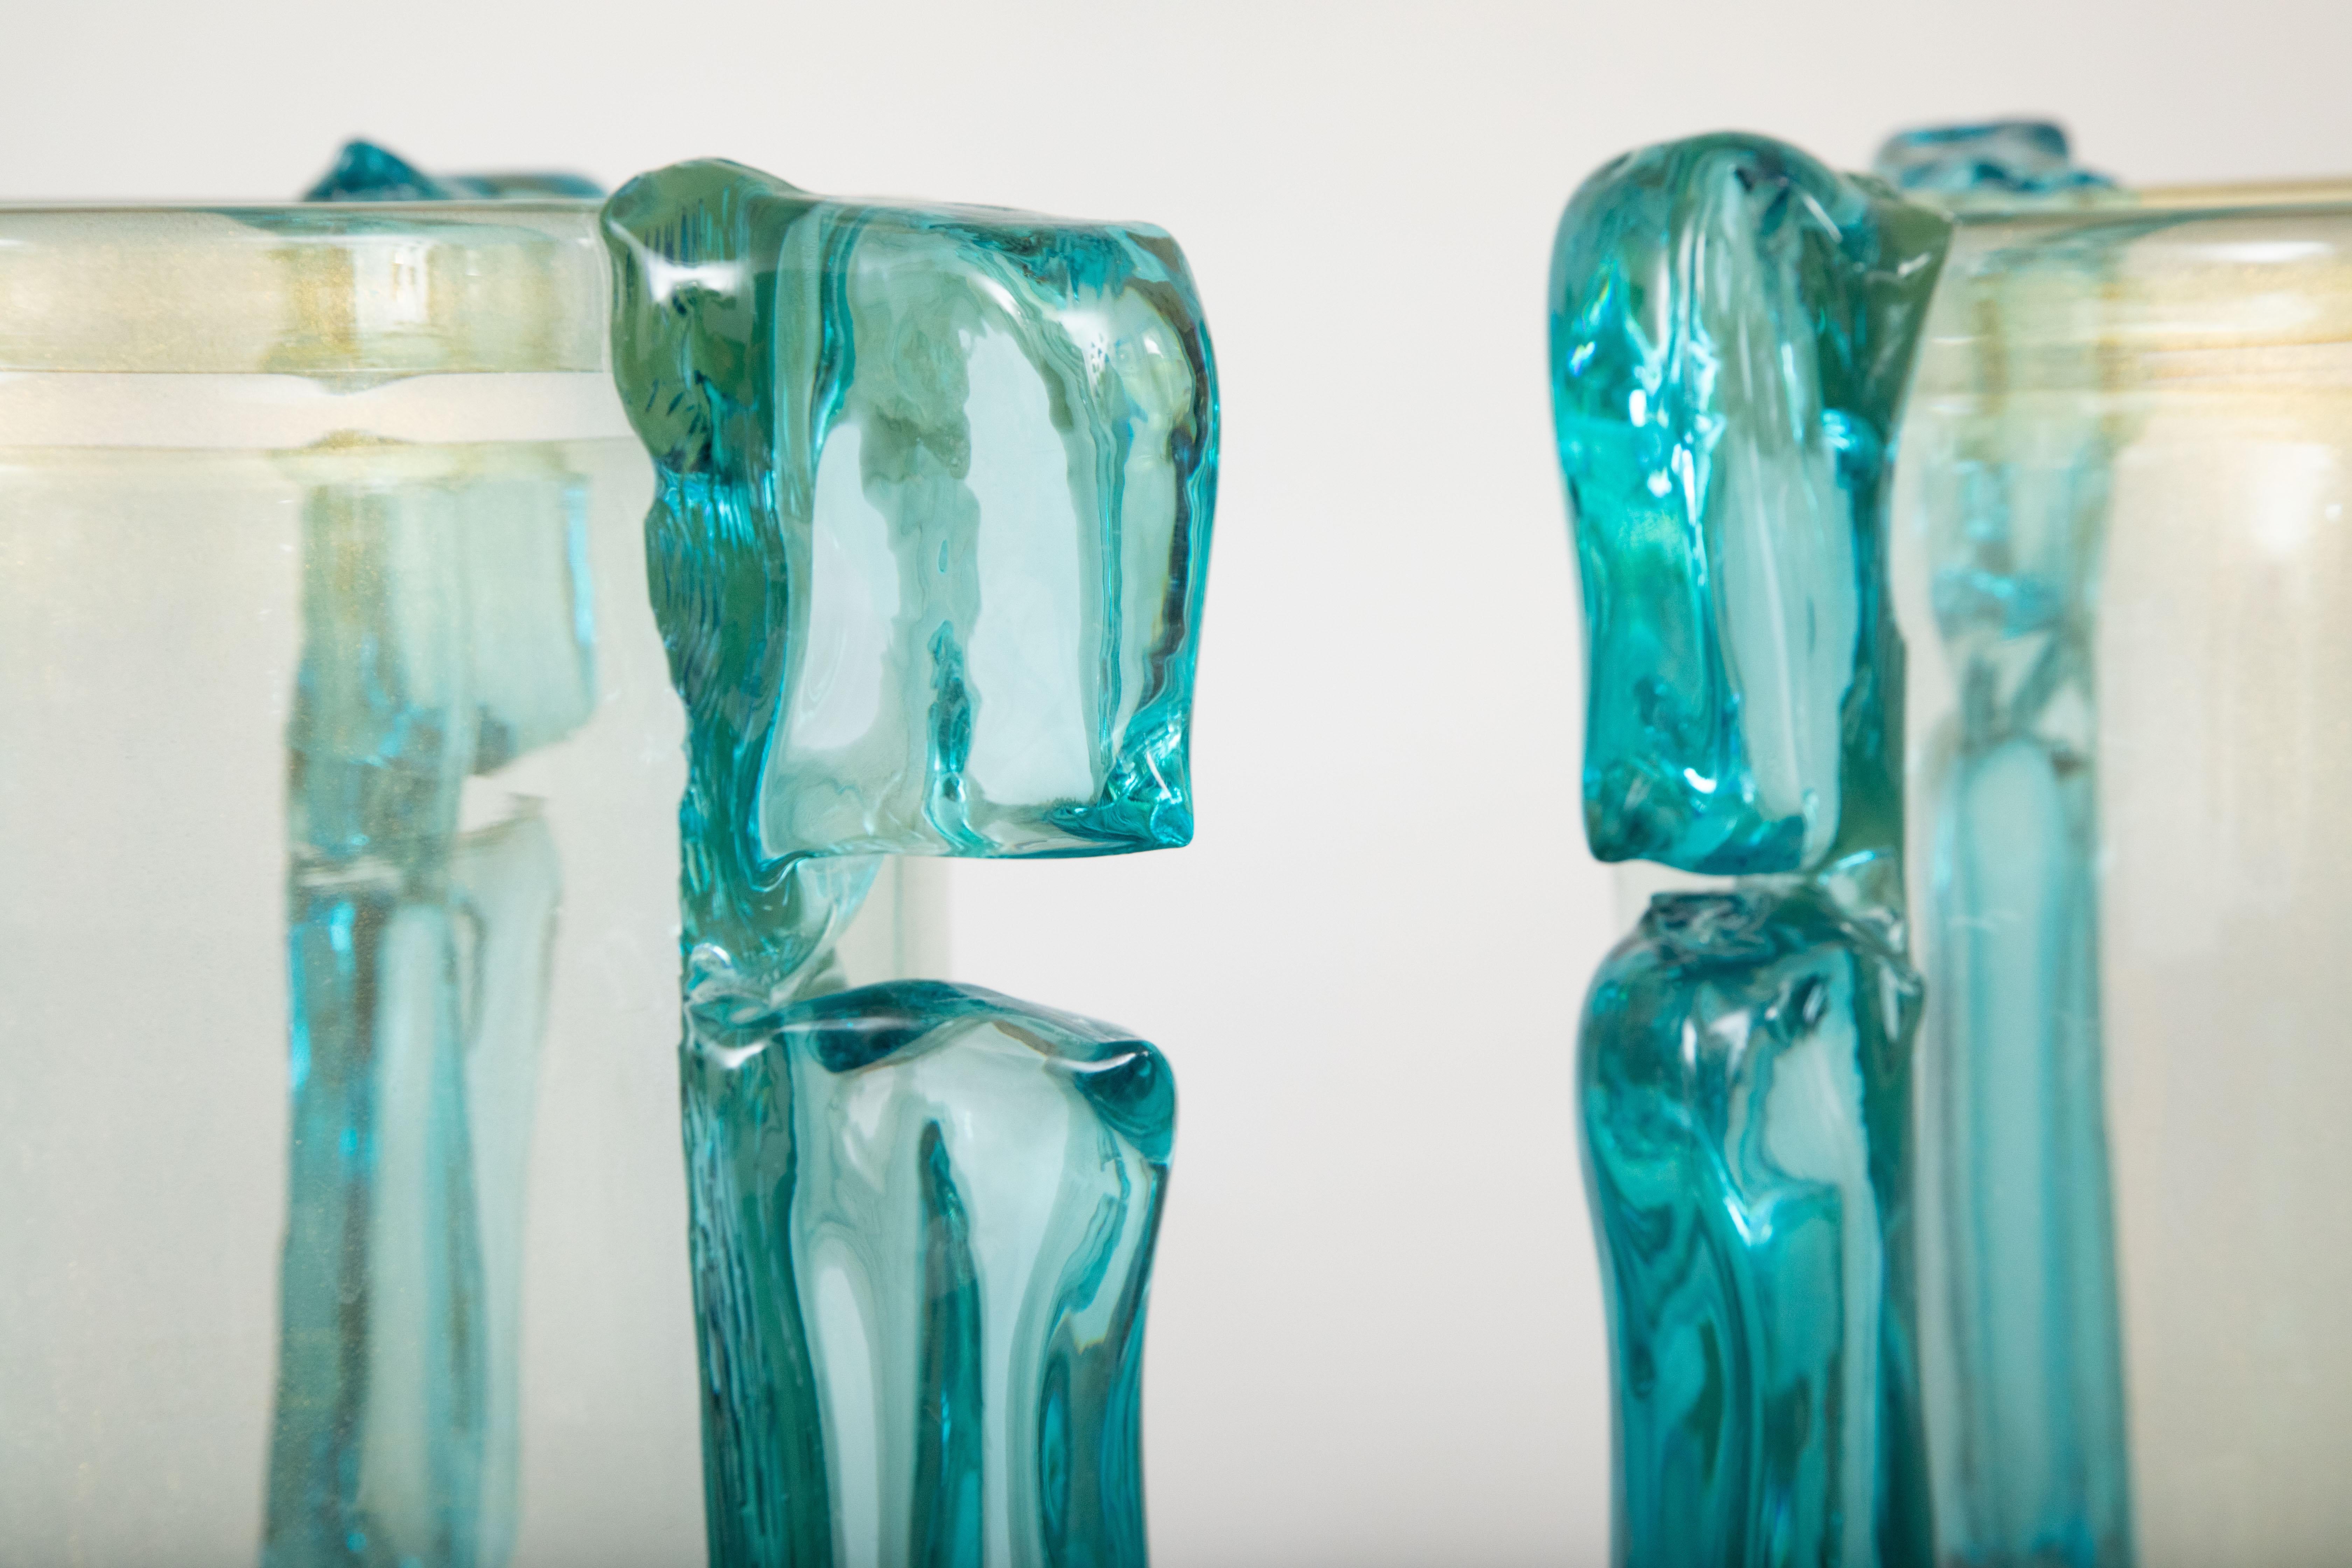 Pair of large blue and clear Murano glass vases, in stock
Italy 2020
Signed under base.
Measure: Base diameter is 6